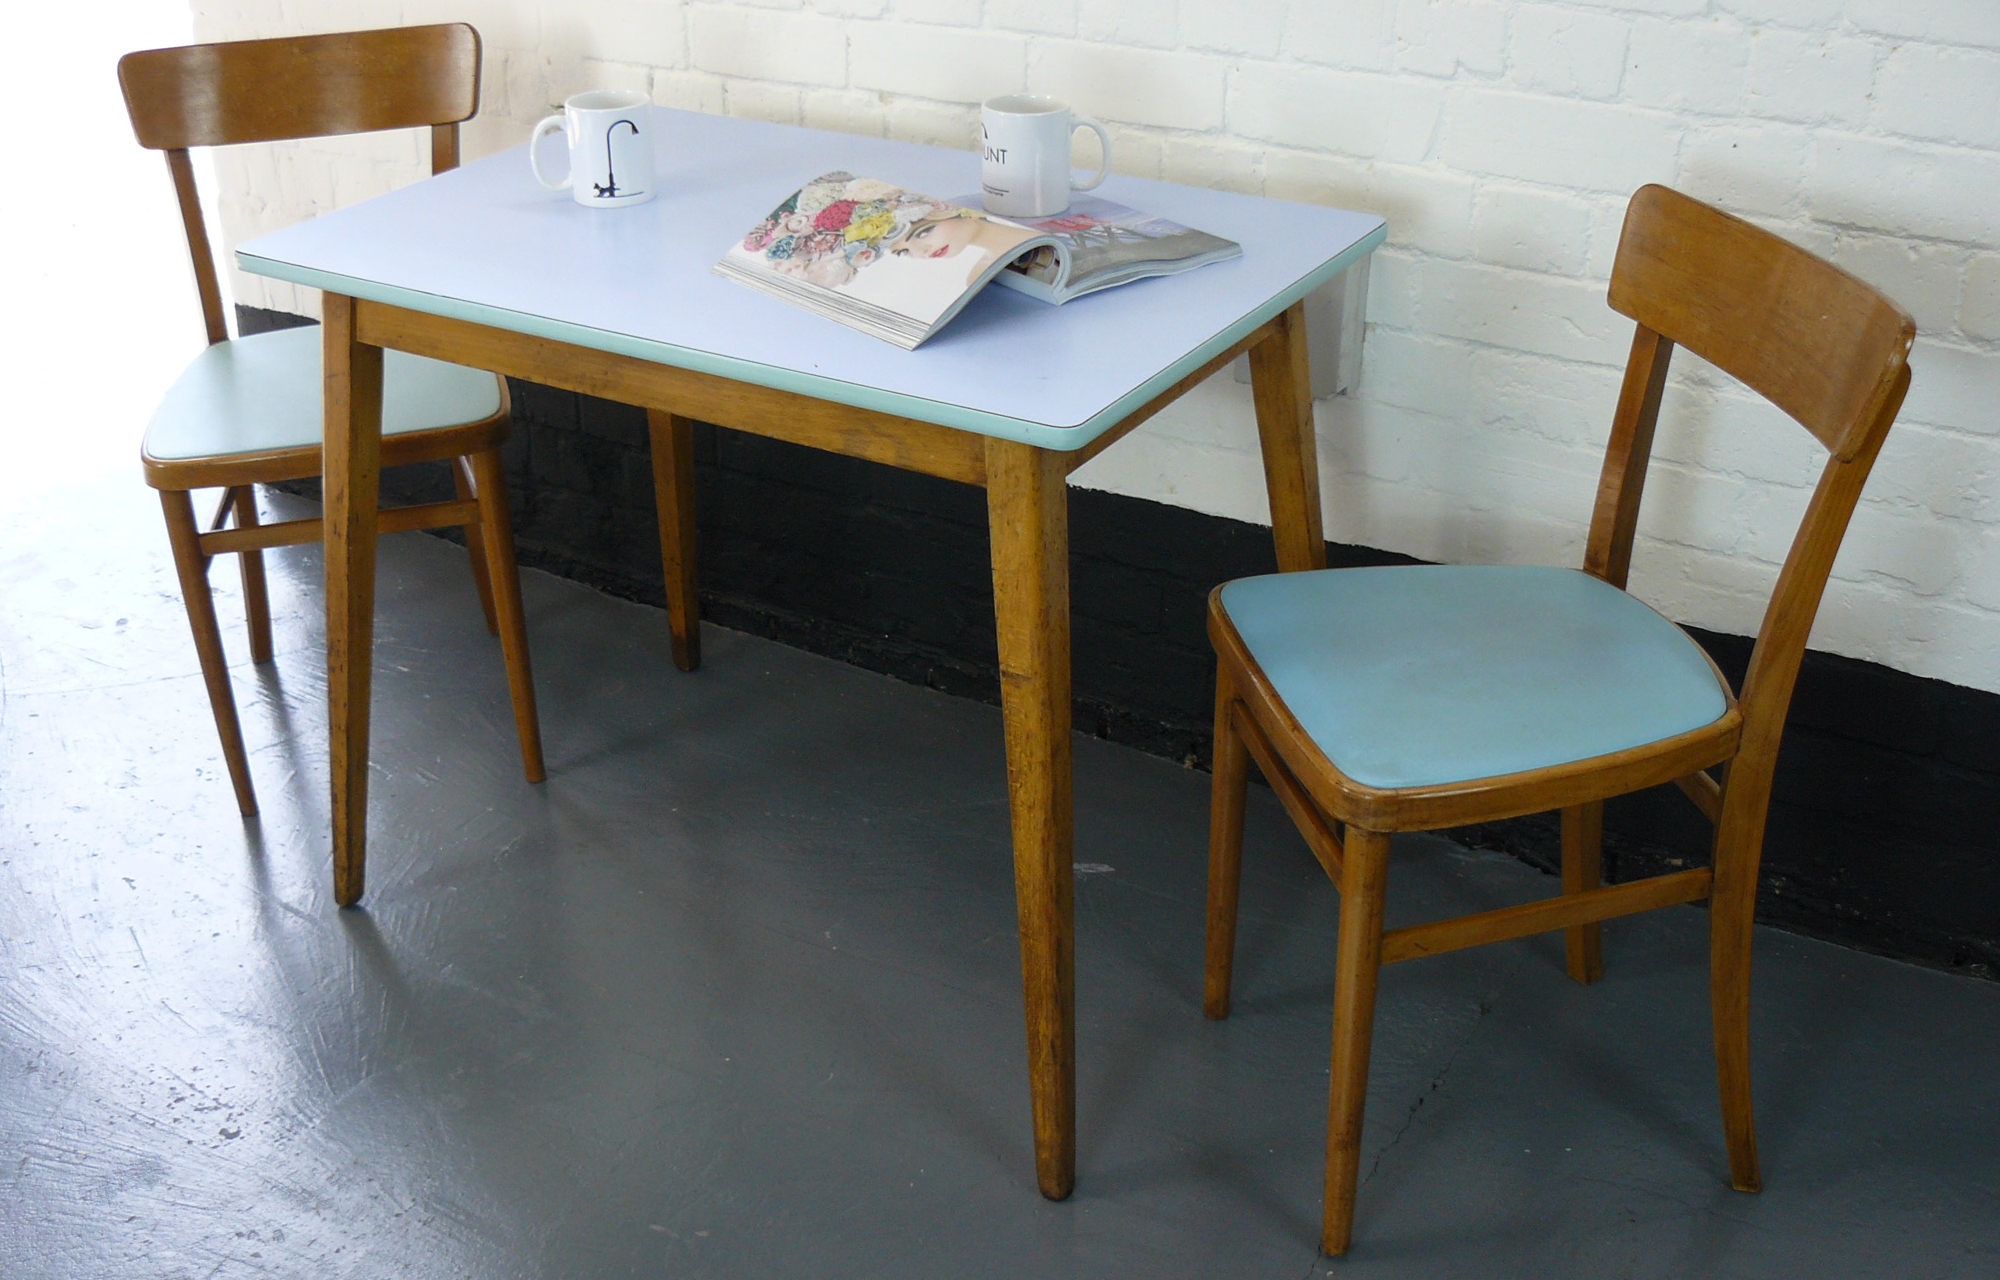 1960 retro kitchen table and chair